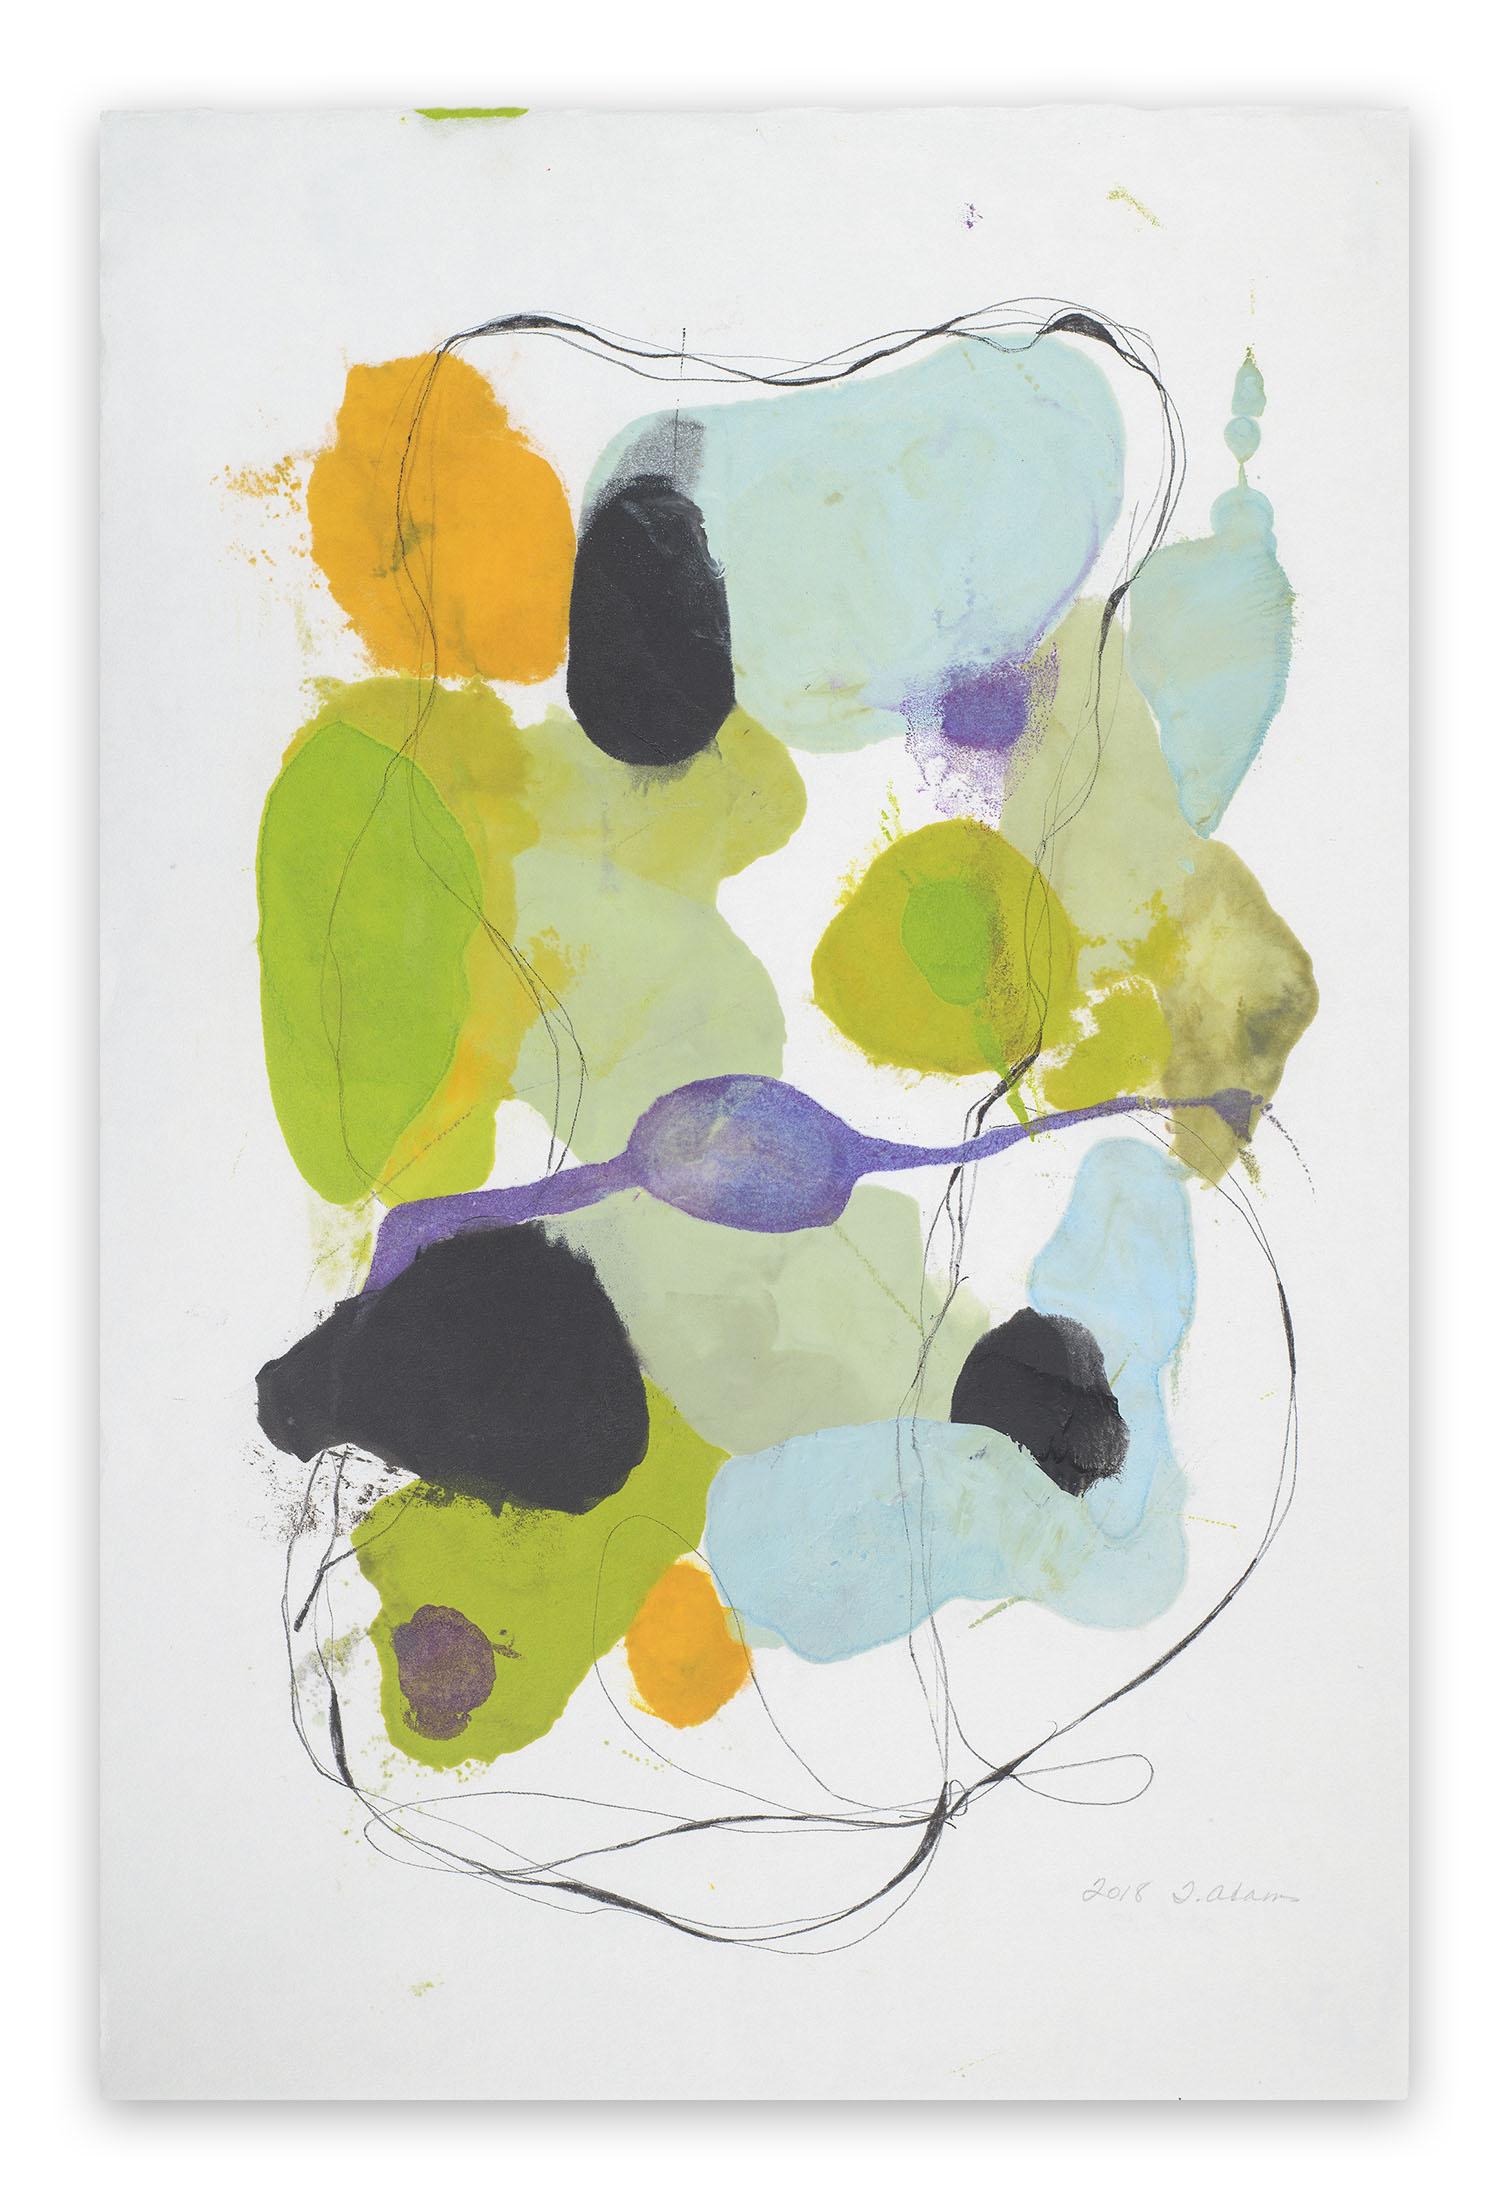 Tracey Adams Abstract Painting – 0118.13 (Abstraktes Gemälde)